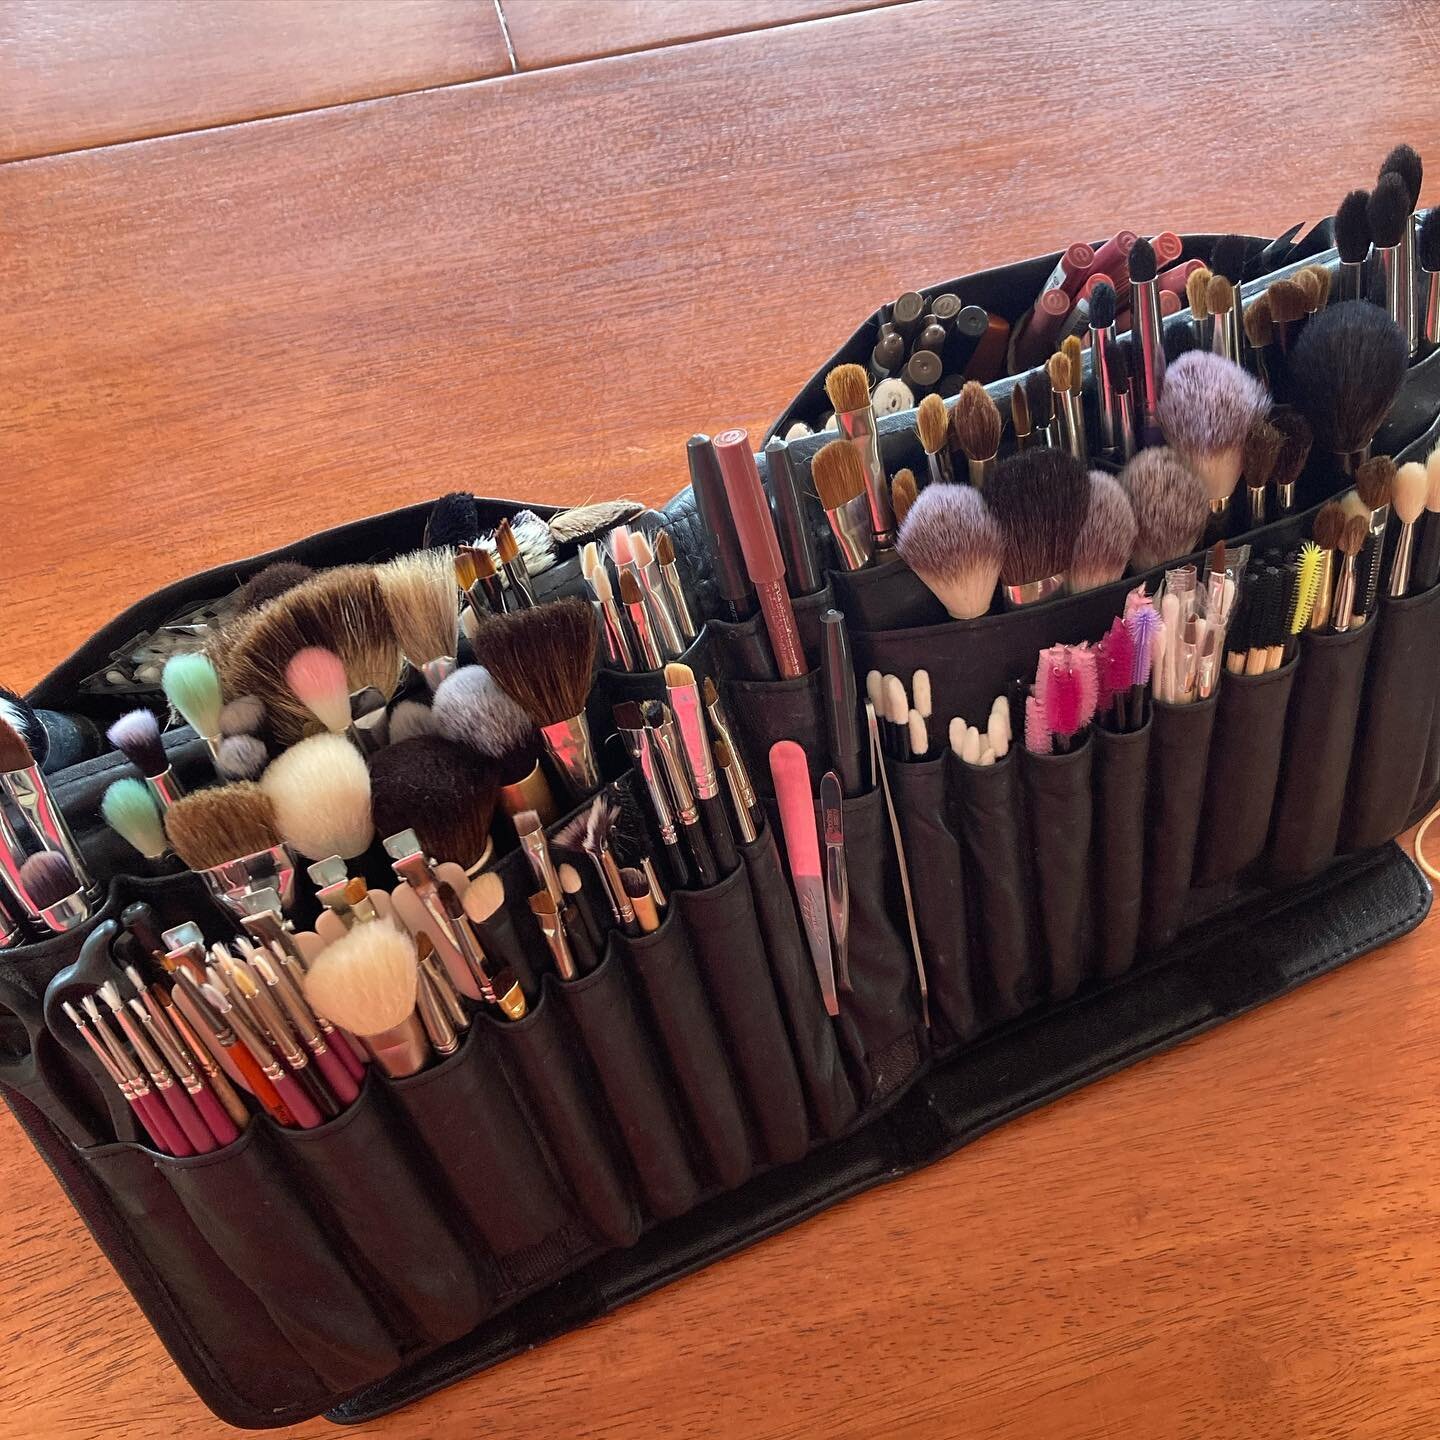 I have a motto &ldquo;you can never have enough brushes&rdquo; and yes I have more than this. 
Hygiene is key as a makeup artist and you need lots of brushes to use on each individual client. No sharing of brushes between clients. 
#some of my faves 